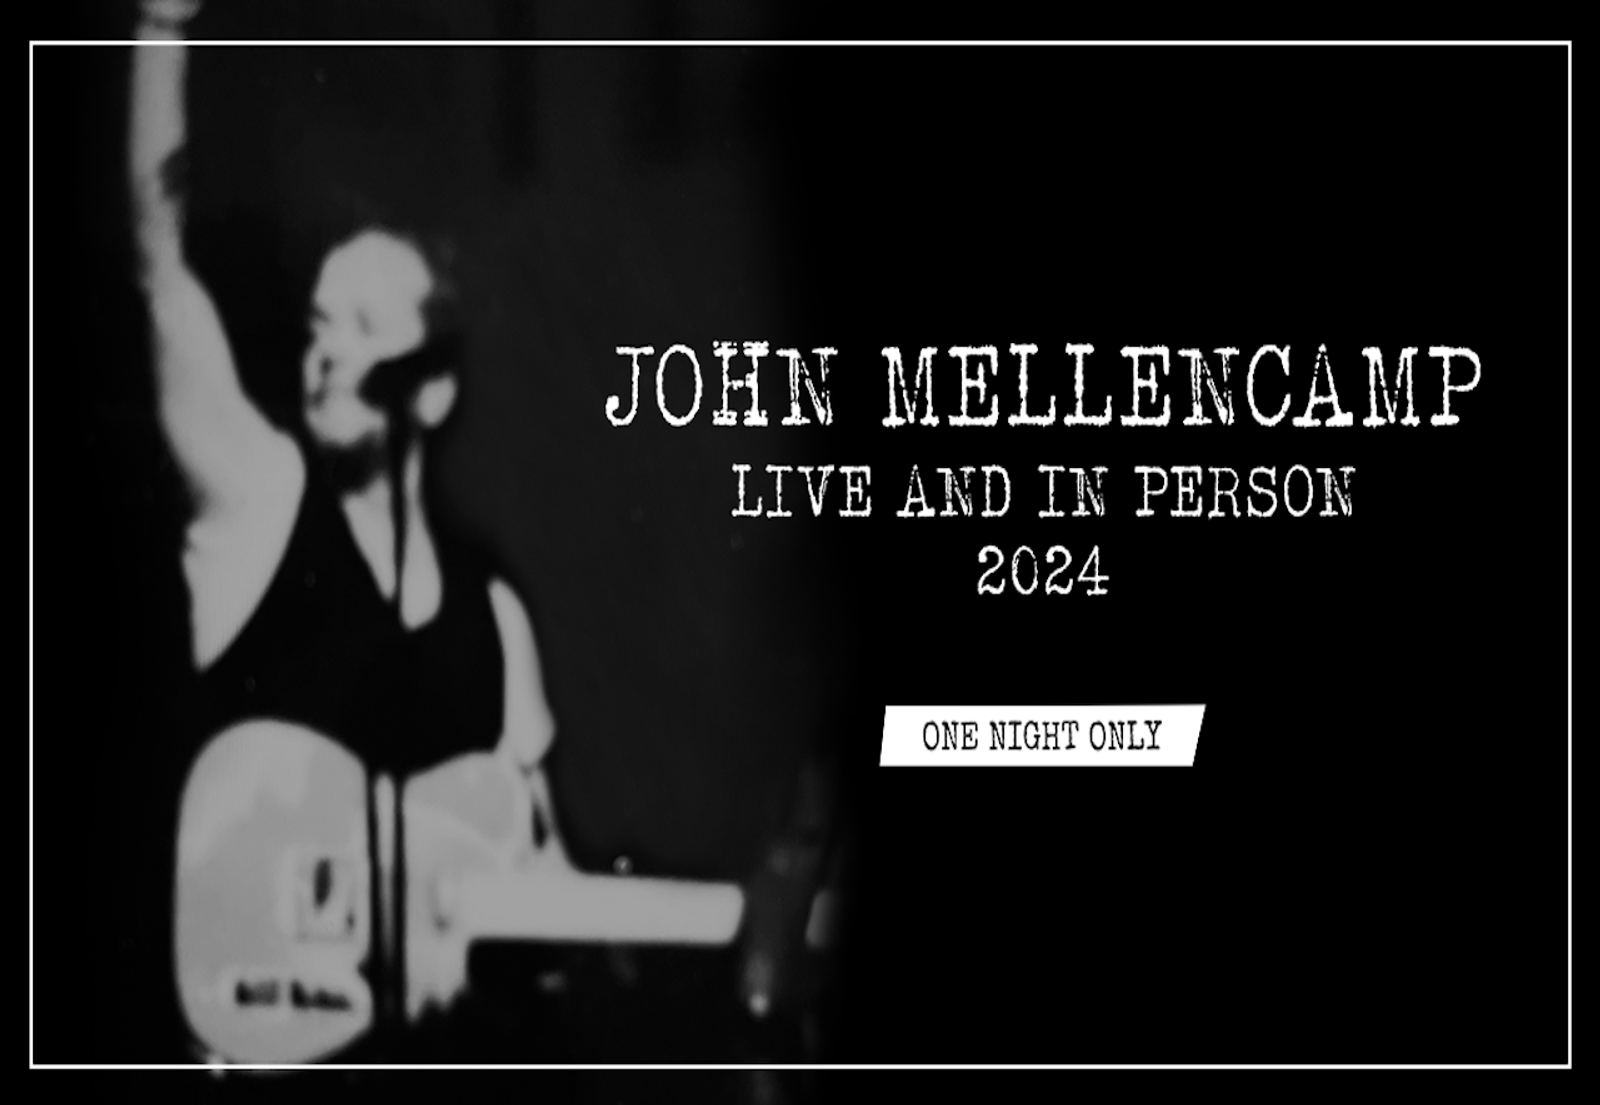 John Mellencamp Continues Acclaimed Tour with "Live And In Person 2024"